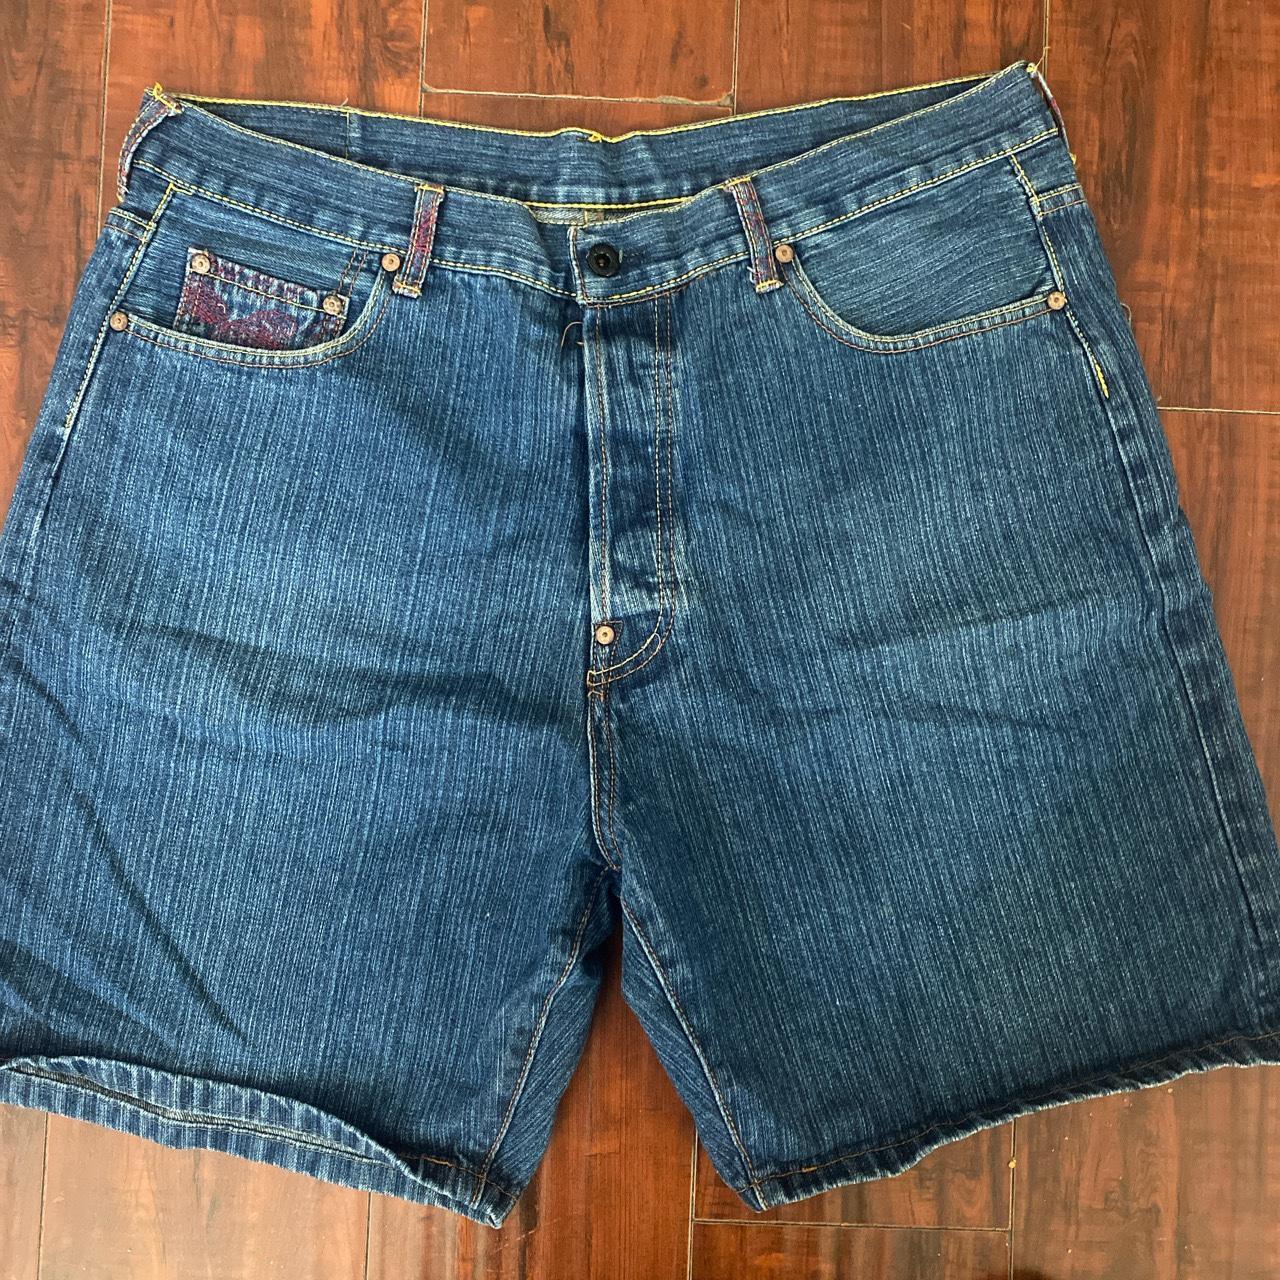 RMC Jorts Size 38 Good condition #Y2K #Southpole... - Depop